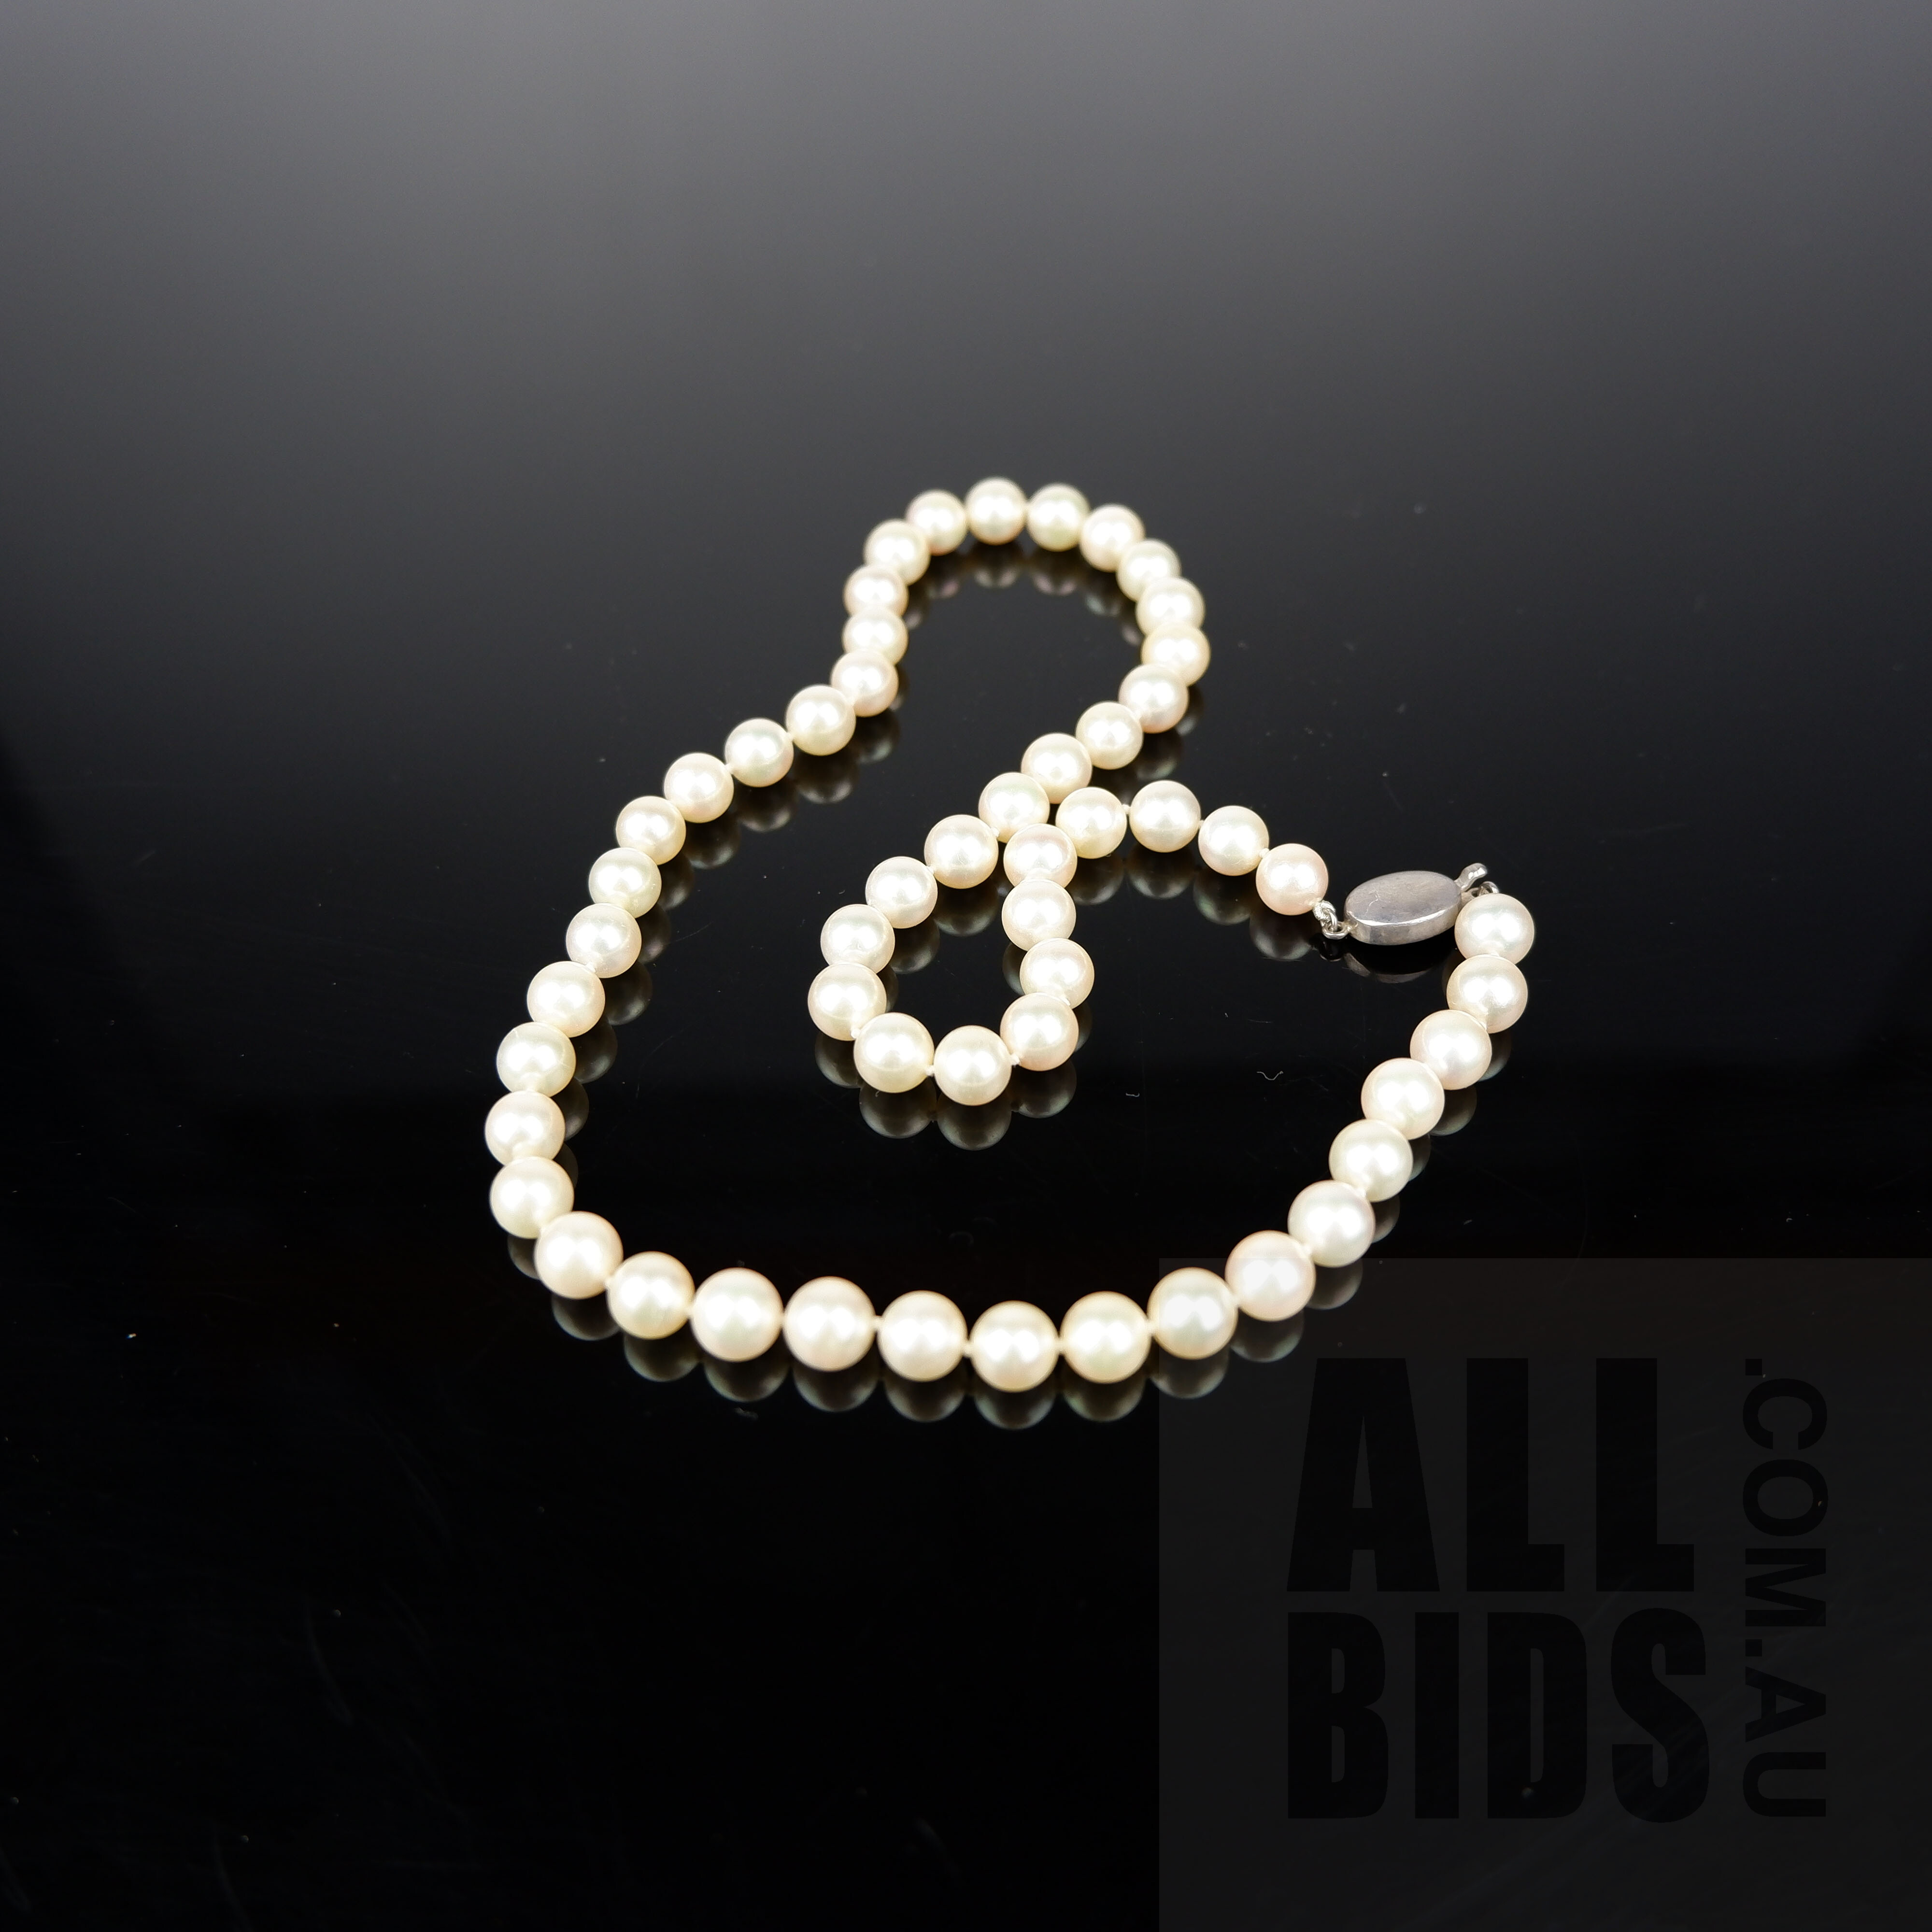 'Strand Round Akoya Type Cultured Pearls, Creamy White, Sterling Silver Clasp'